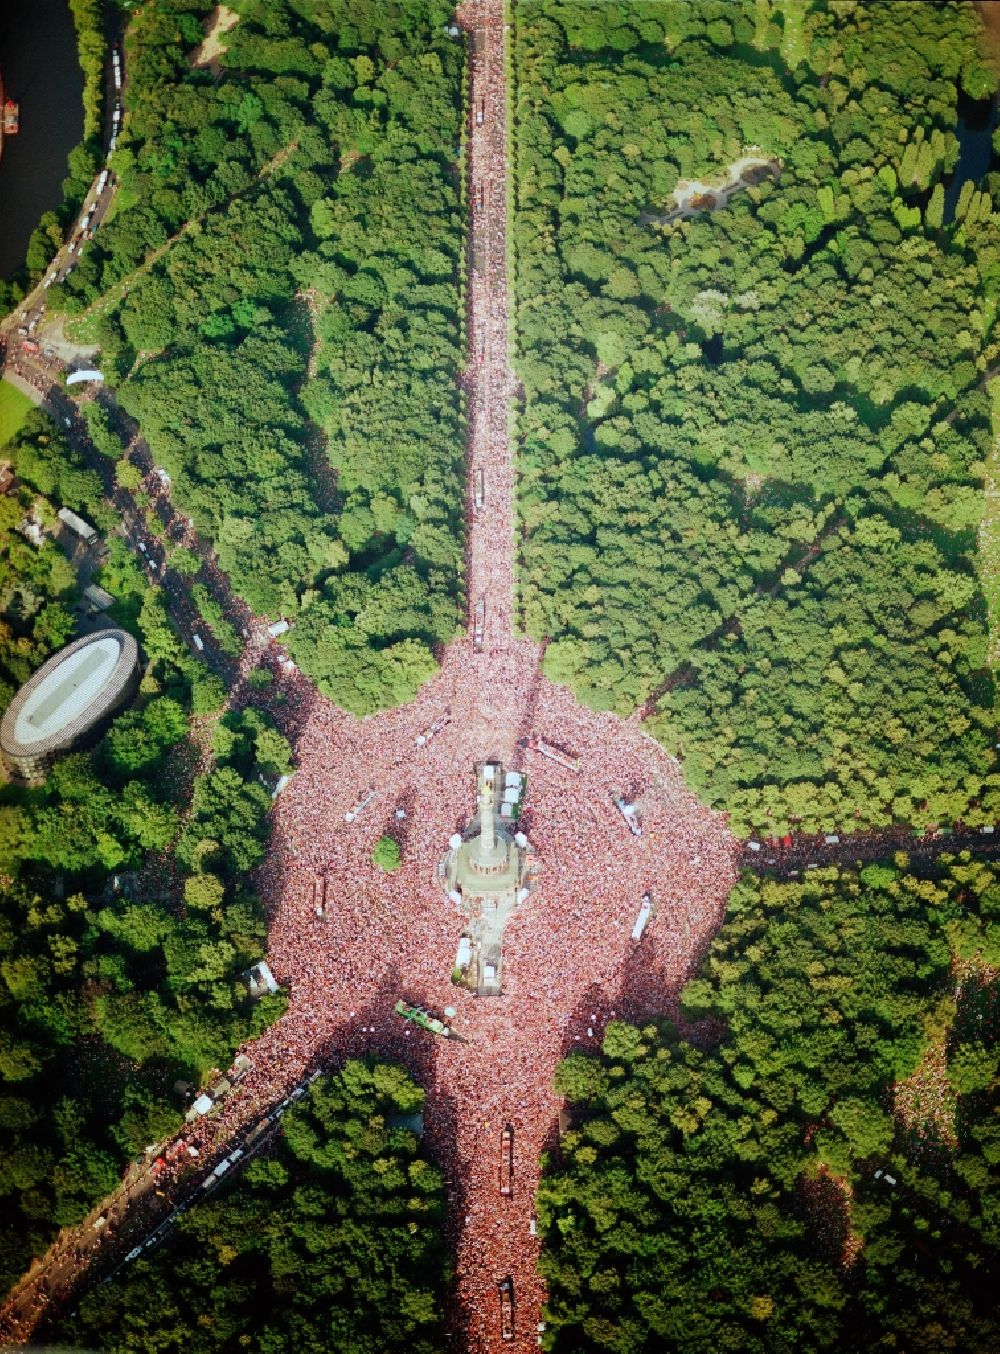 Berlin from the bird's eye view: Participants at the event area of Loveparade auf on Grossen Stern of Siegessaeule destrict Tiergarten in Berlin, Germany